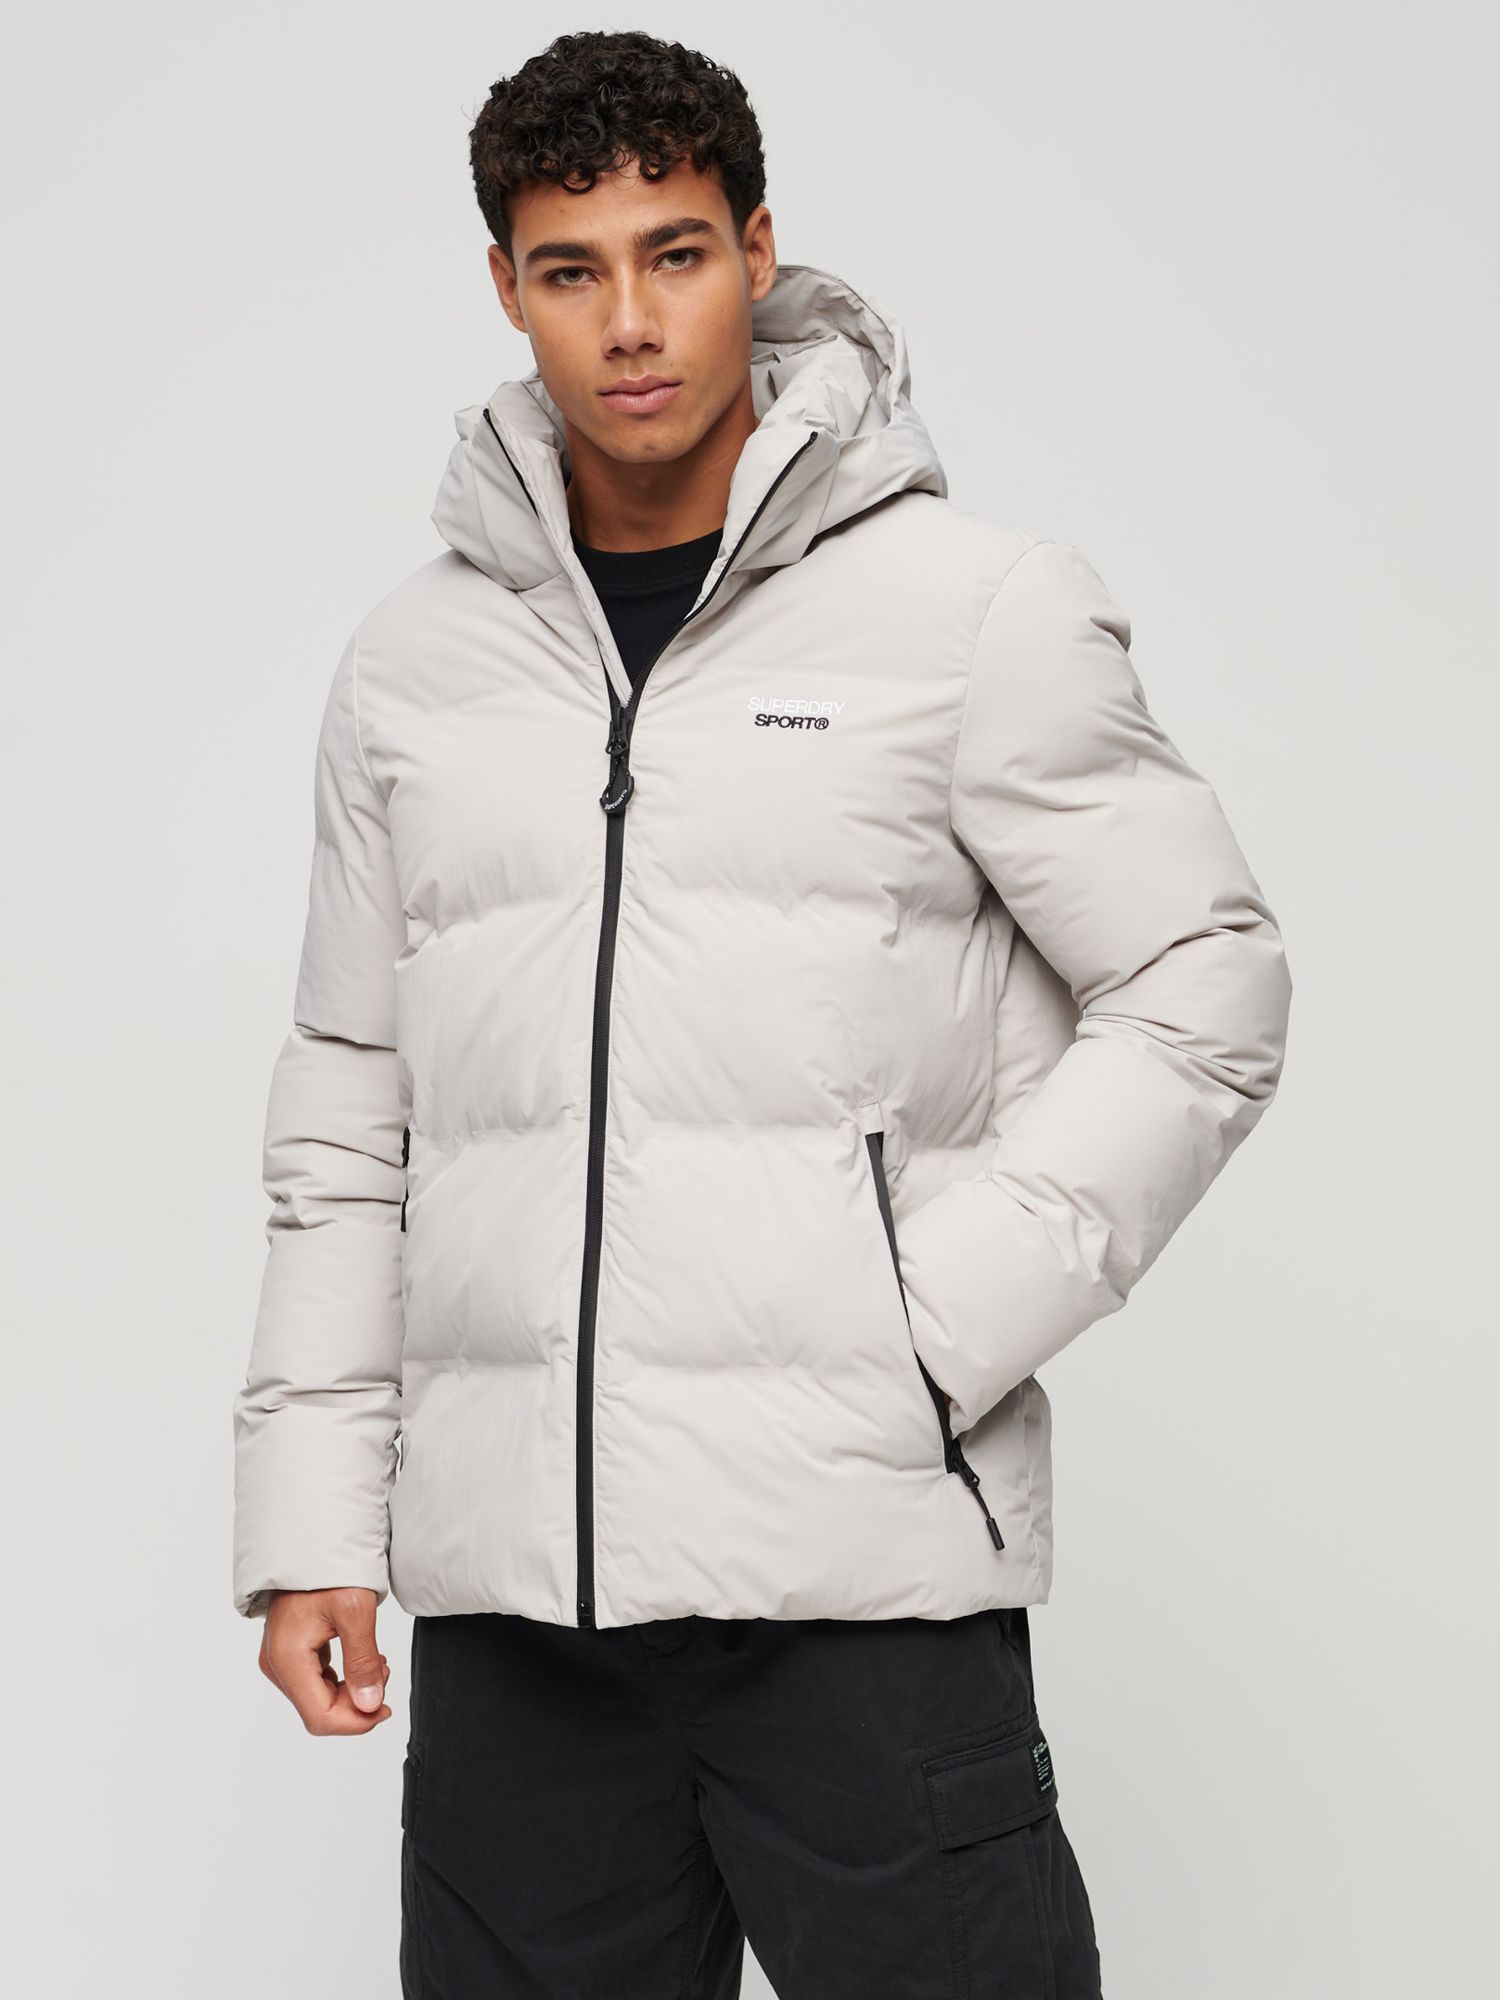 Grey Lewis Jacket, Boxy John & Moonlight Partners Hooded at Superdry Puffer